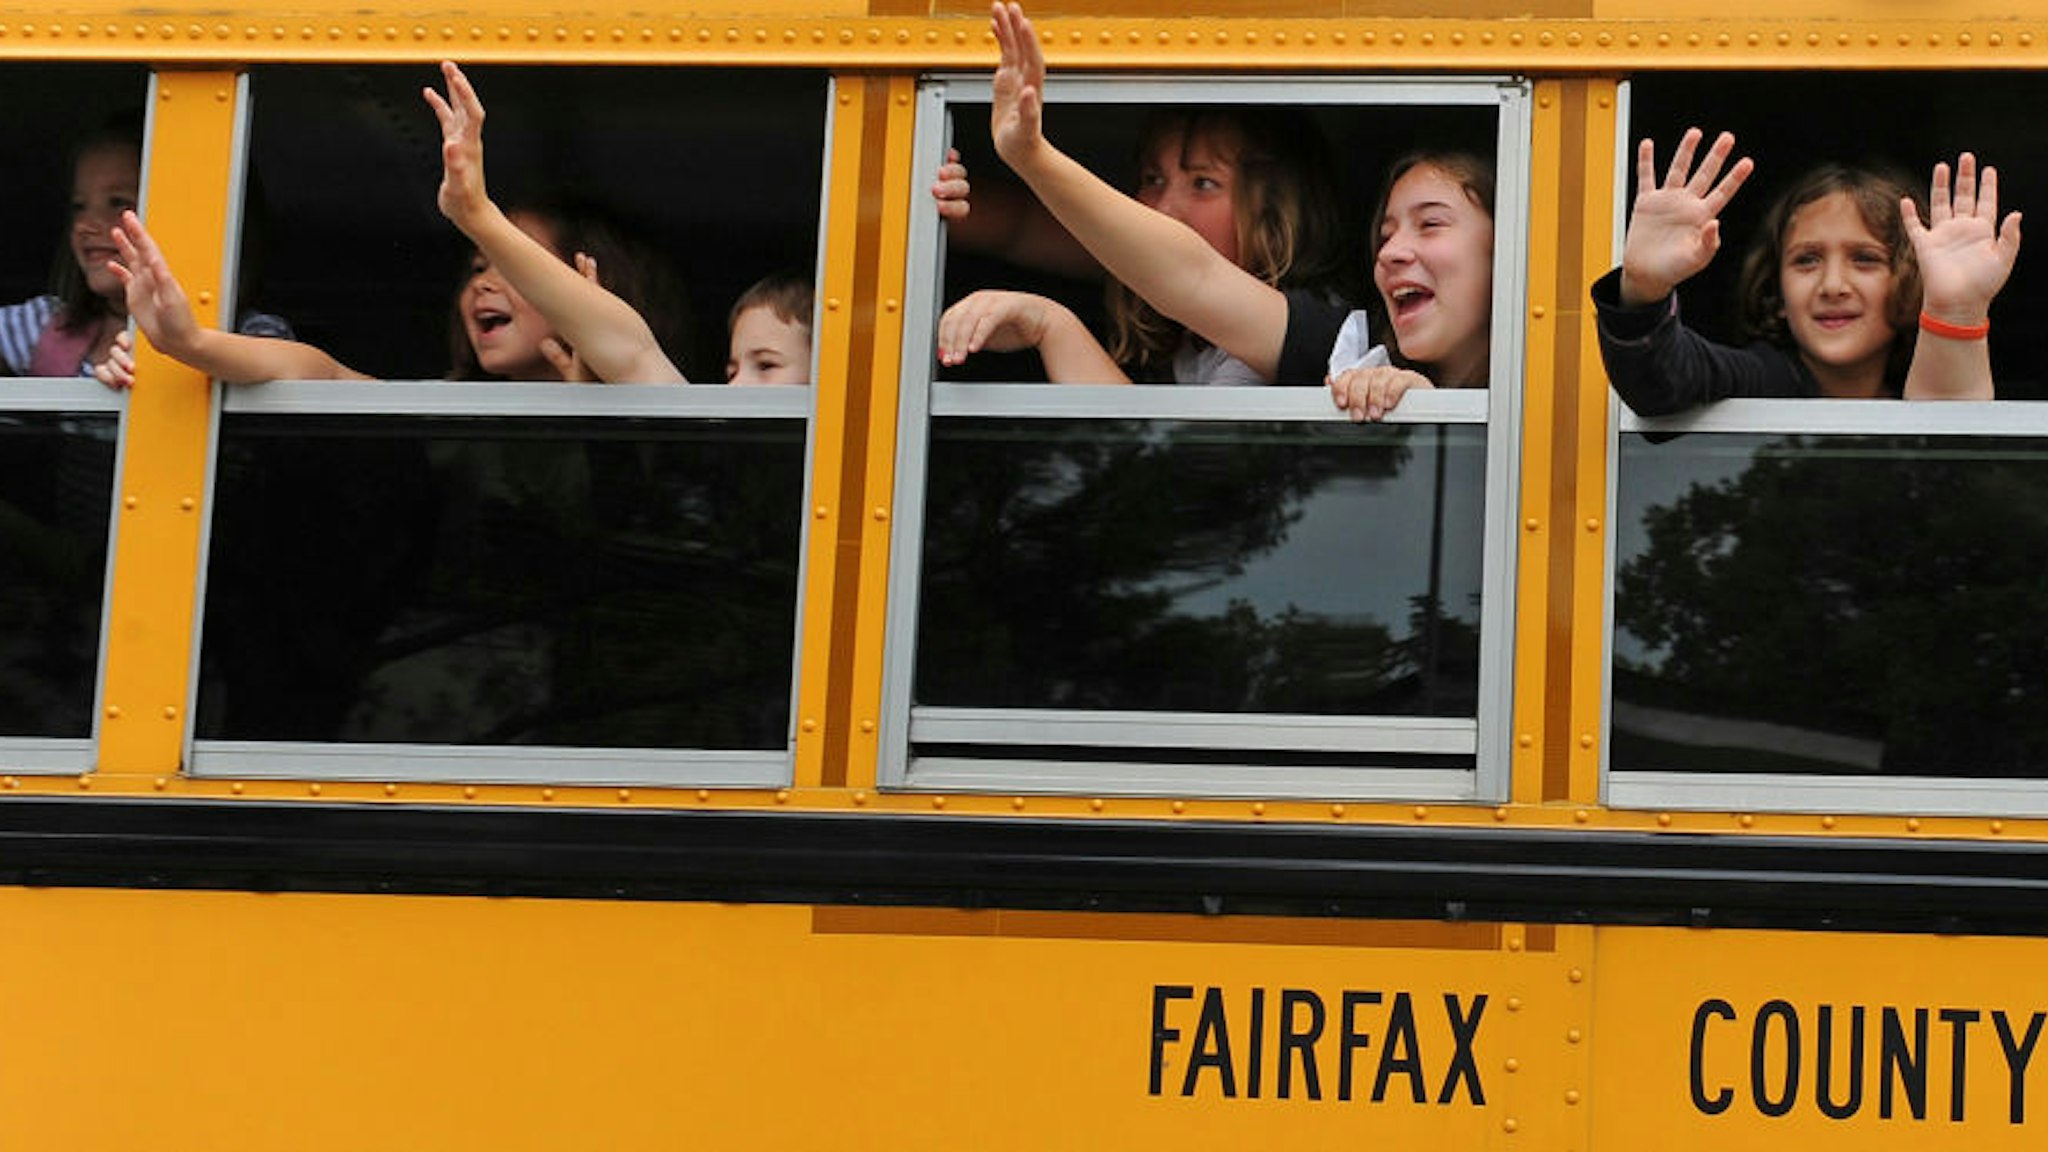 CLIFTON, VA - JUNE 21: Students aboard a school bus wave bye to their teachers at the end of classes during the last day of school at Clifton Elementary School on June 21, 2011 in Clifton, Va. The school is permanently closing its doors because of county boundary changes. Clifton is one of the most rural areas in Fairfax County bringing in kids from one tenth of the county's size. The closing of the school is so controversial that the decision is the subject of a lawsuit in front of the state Supreme Court.